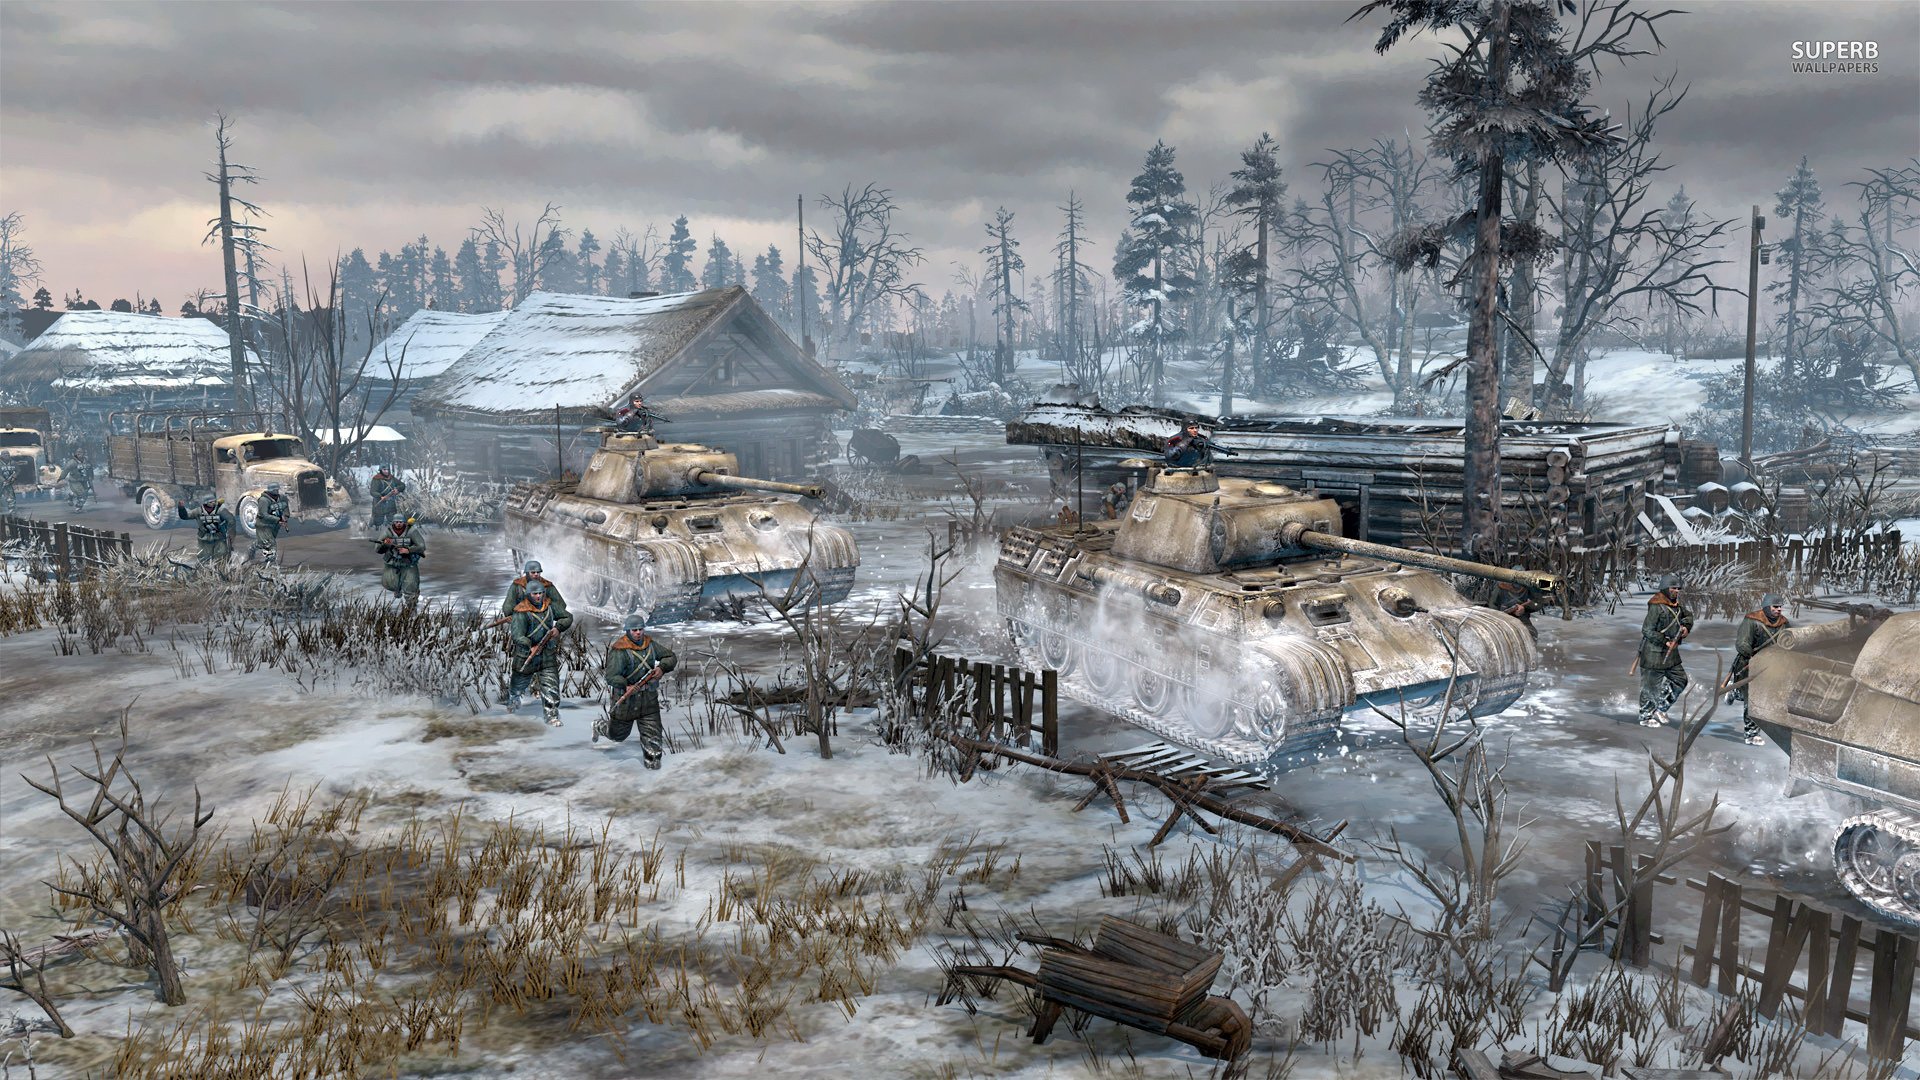 company of heroes 3 wallpaper